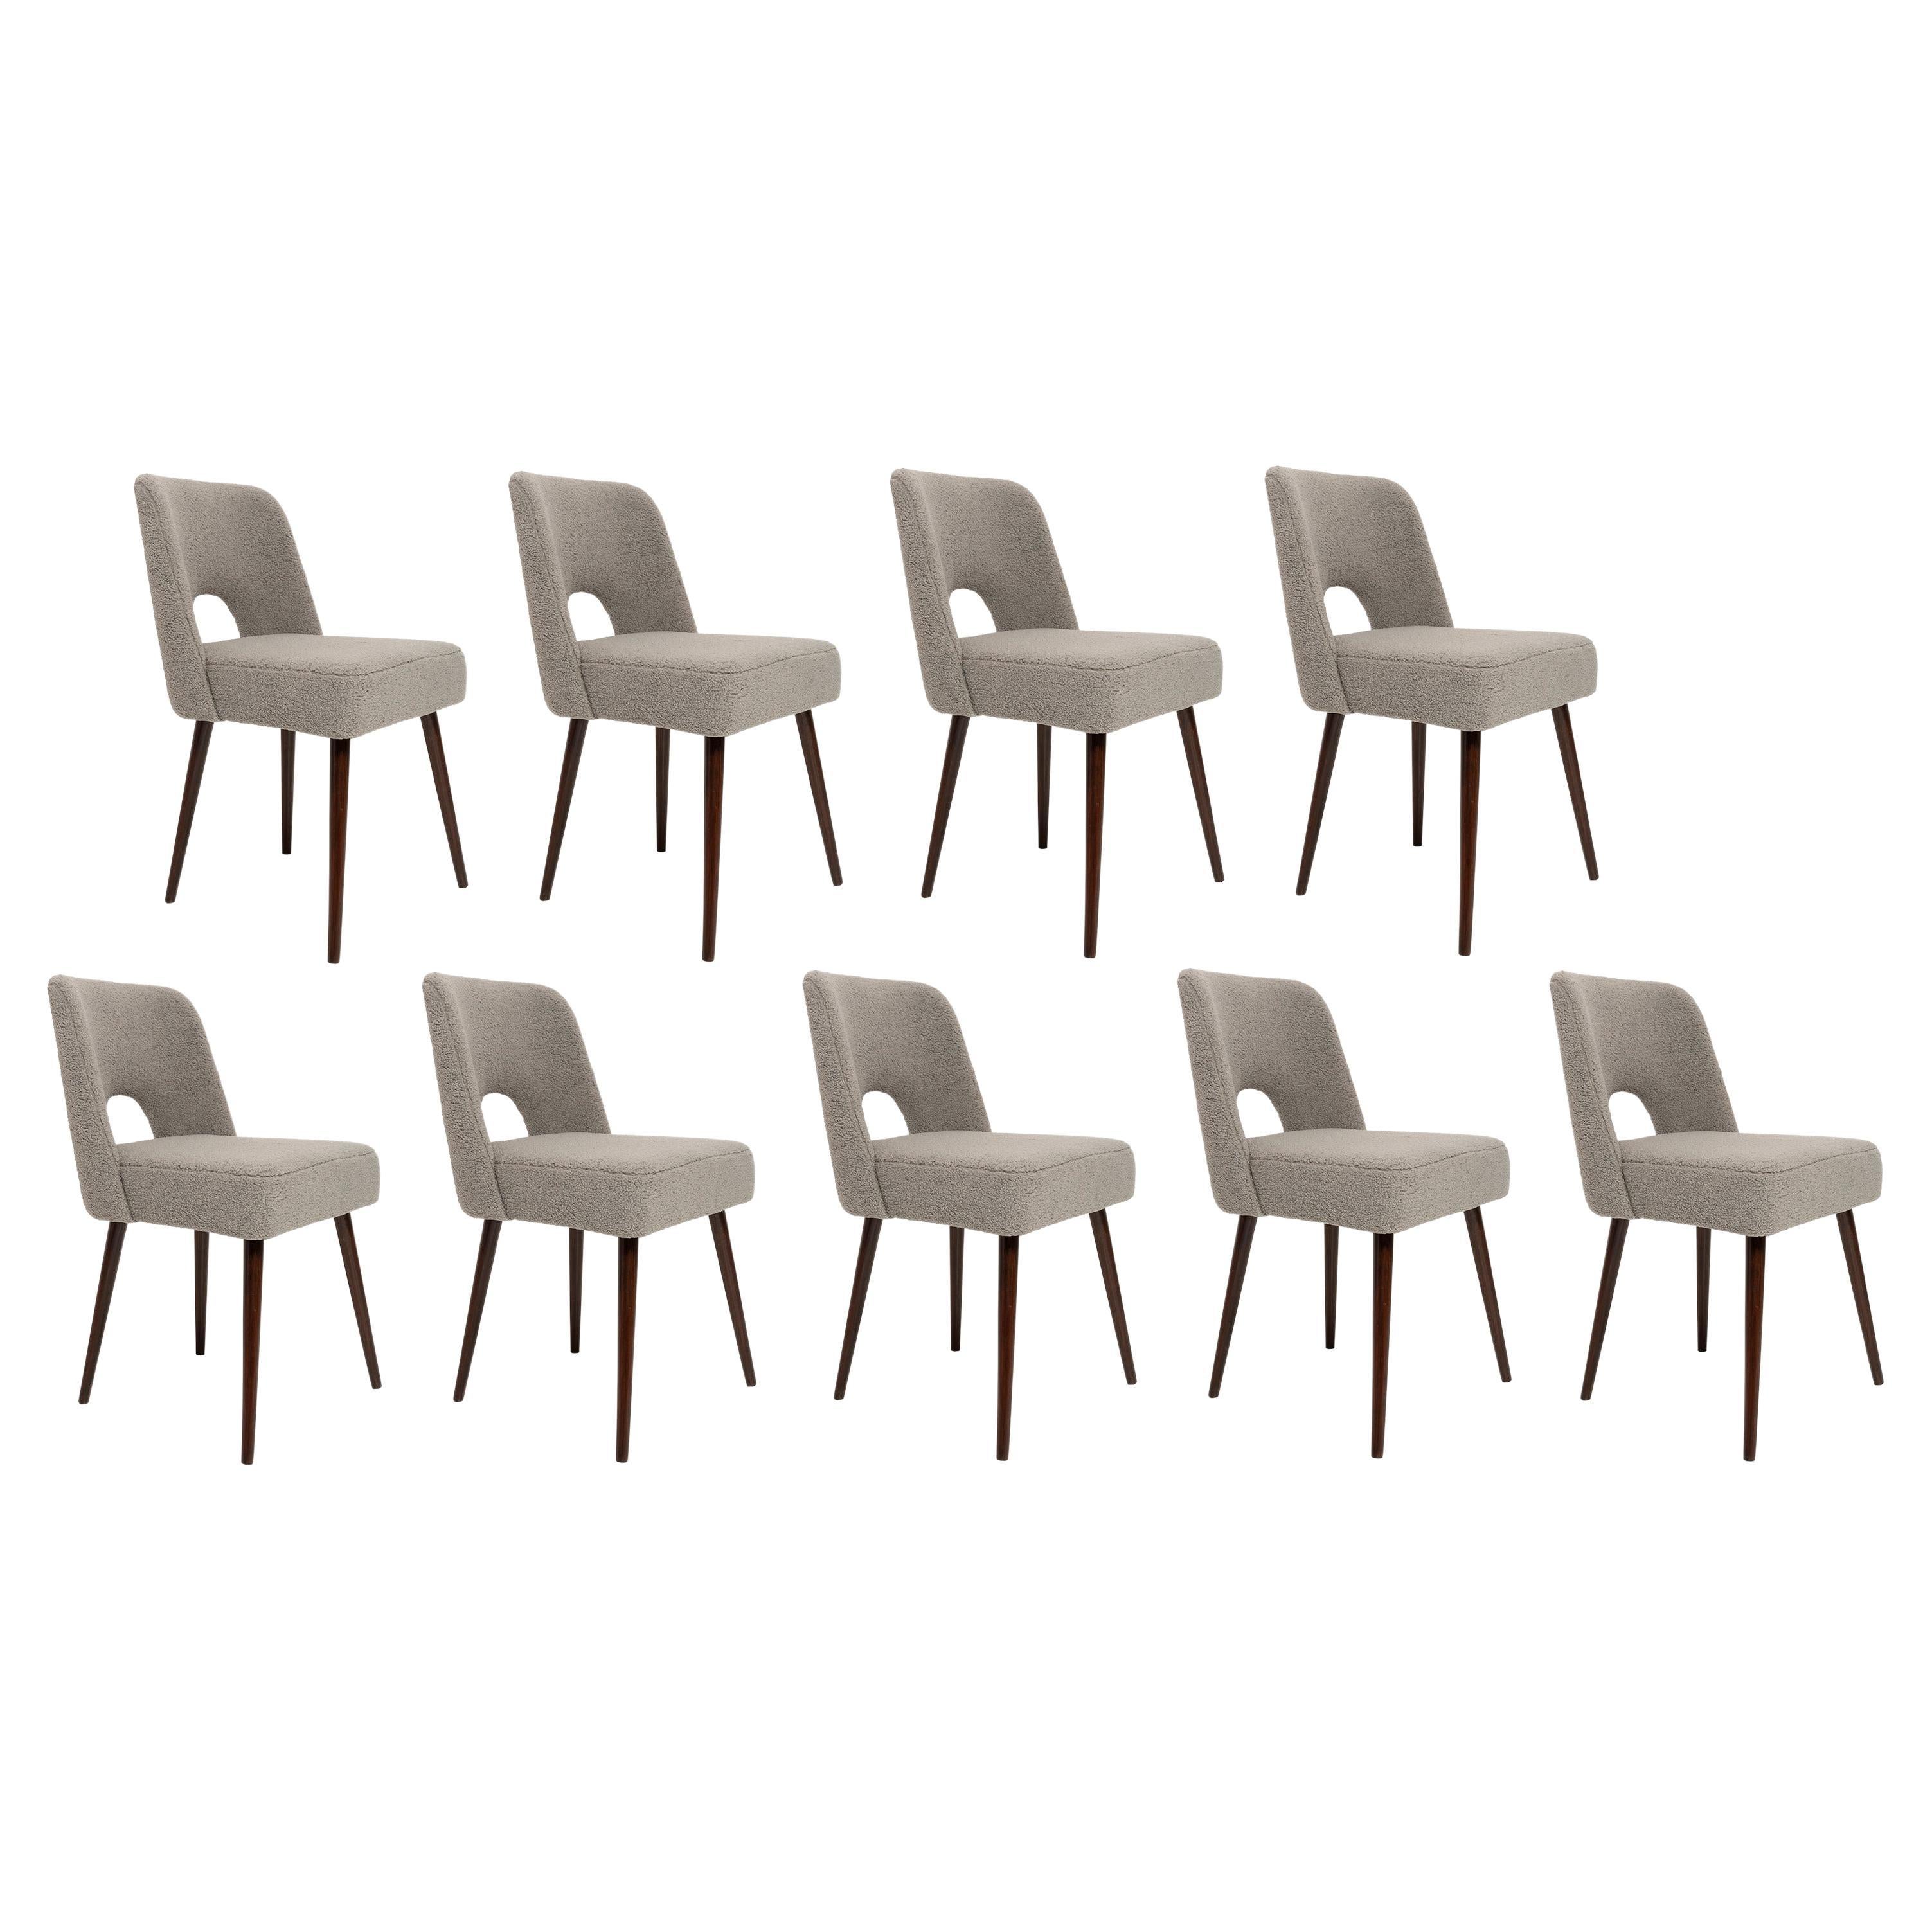 Set of Nine Gray Boucle 'Shell' Chairs, Europe, 1960s For Sale